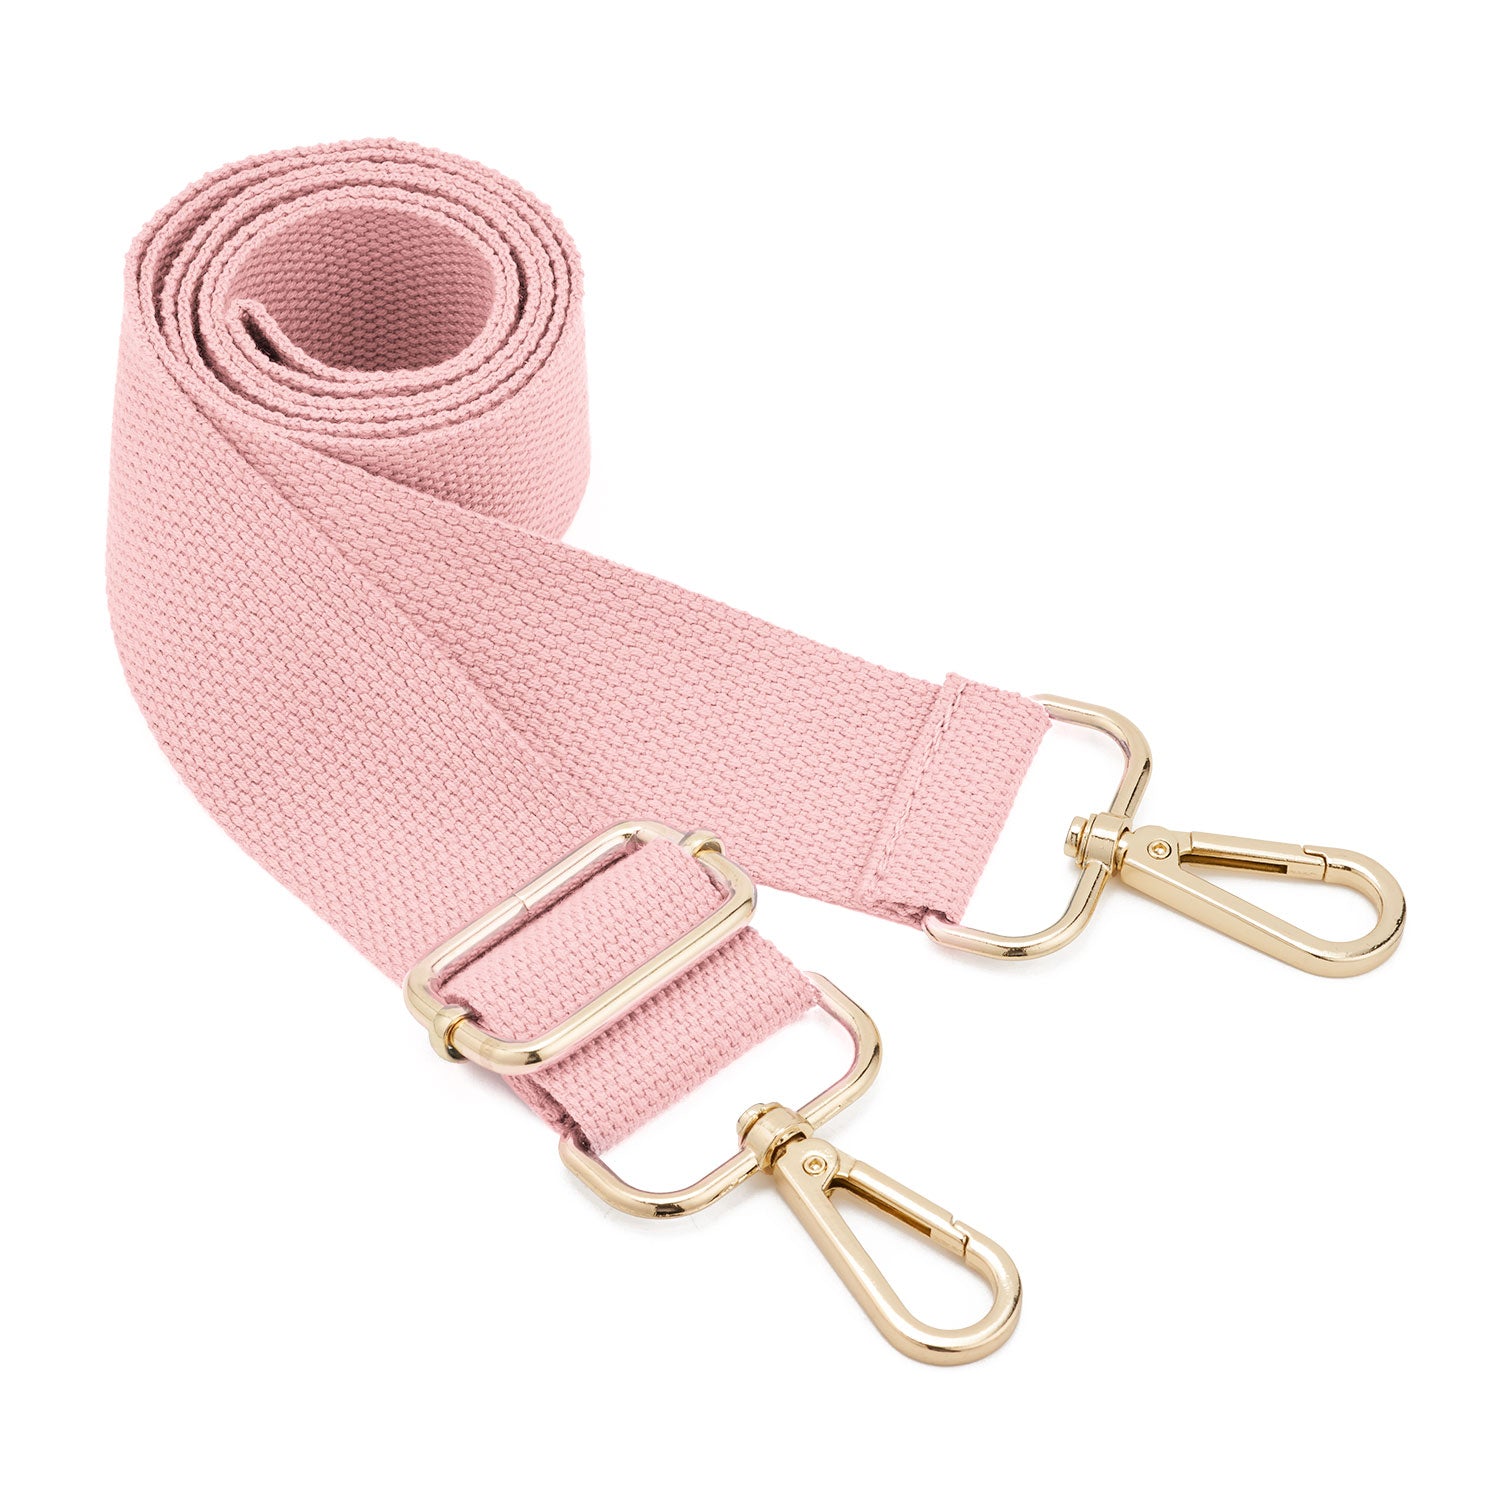  Multi Pochette Accessories Replacement Strap Adjustable  Crossbody Wide Cavas Strap for Shoulder Bags Multi Purpose Strap (Pink) :  Clothing, Shoes & Jewelry